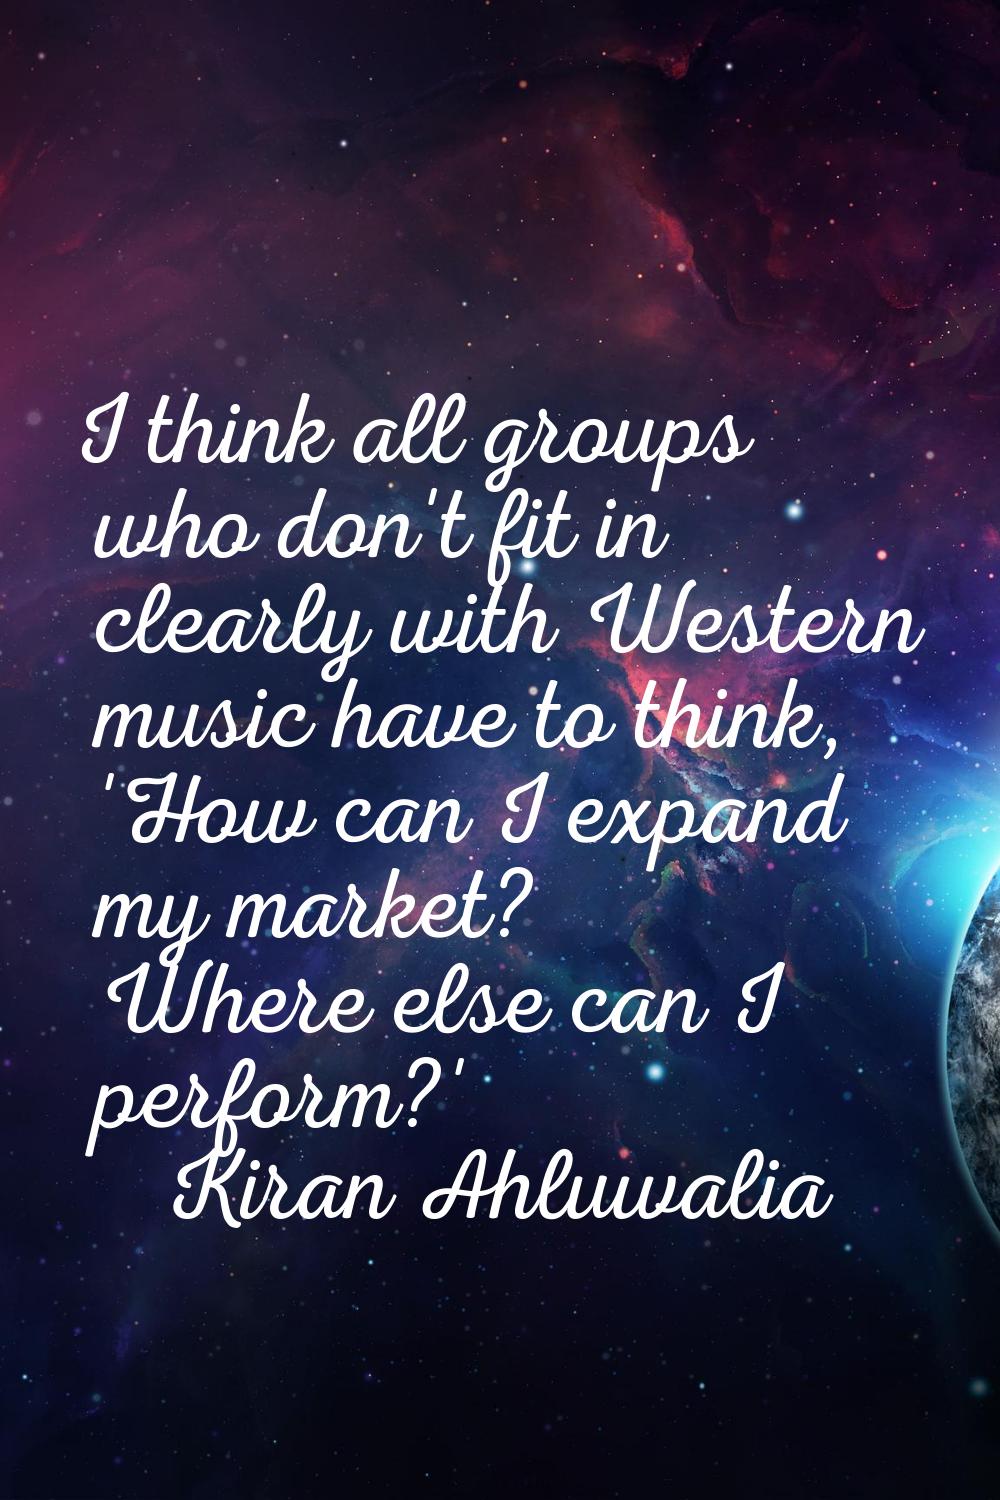 I think all groups who don't fit in clearly with Western music have to think, 'How can I expand my 